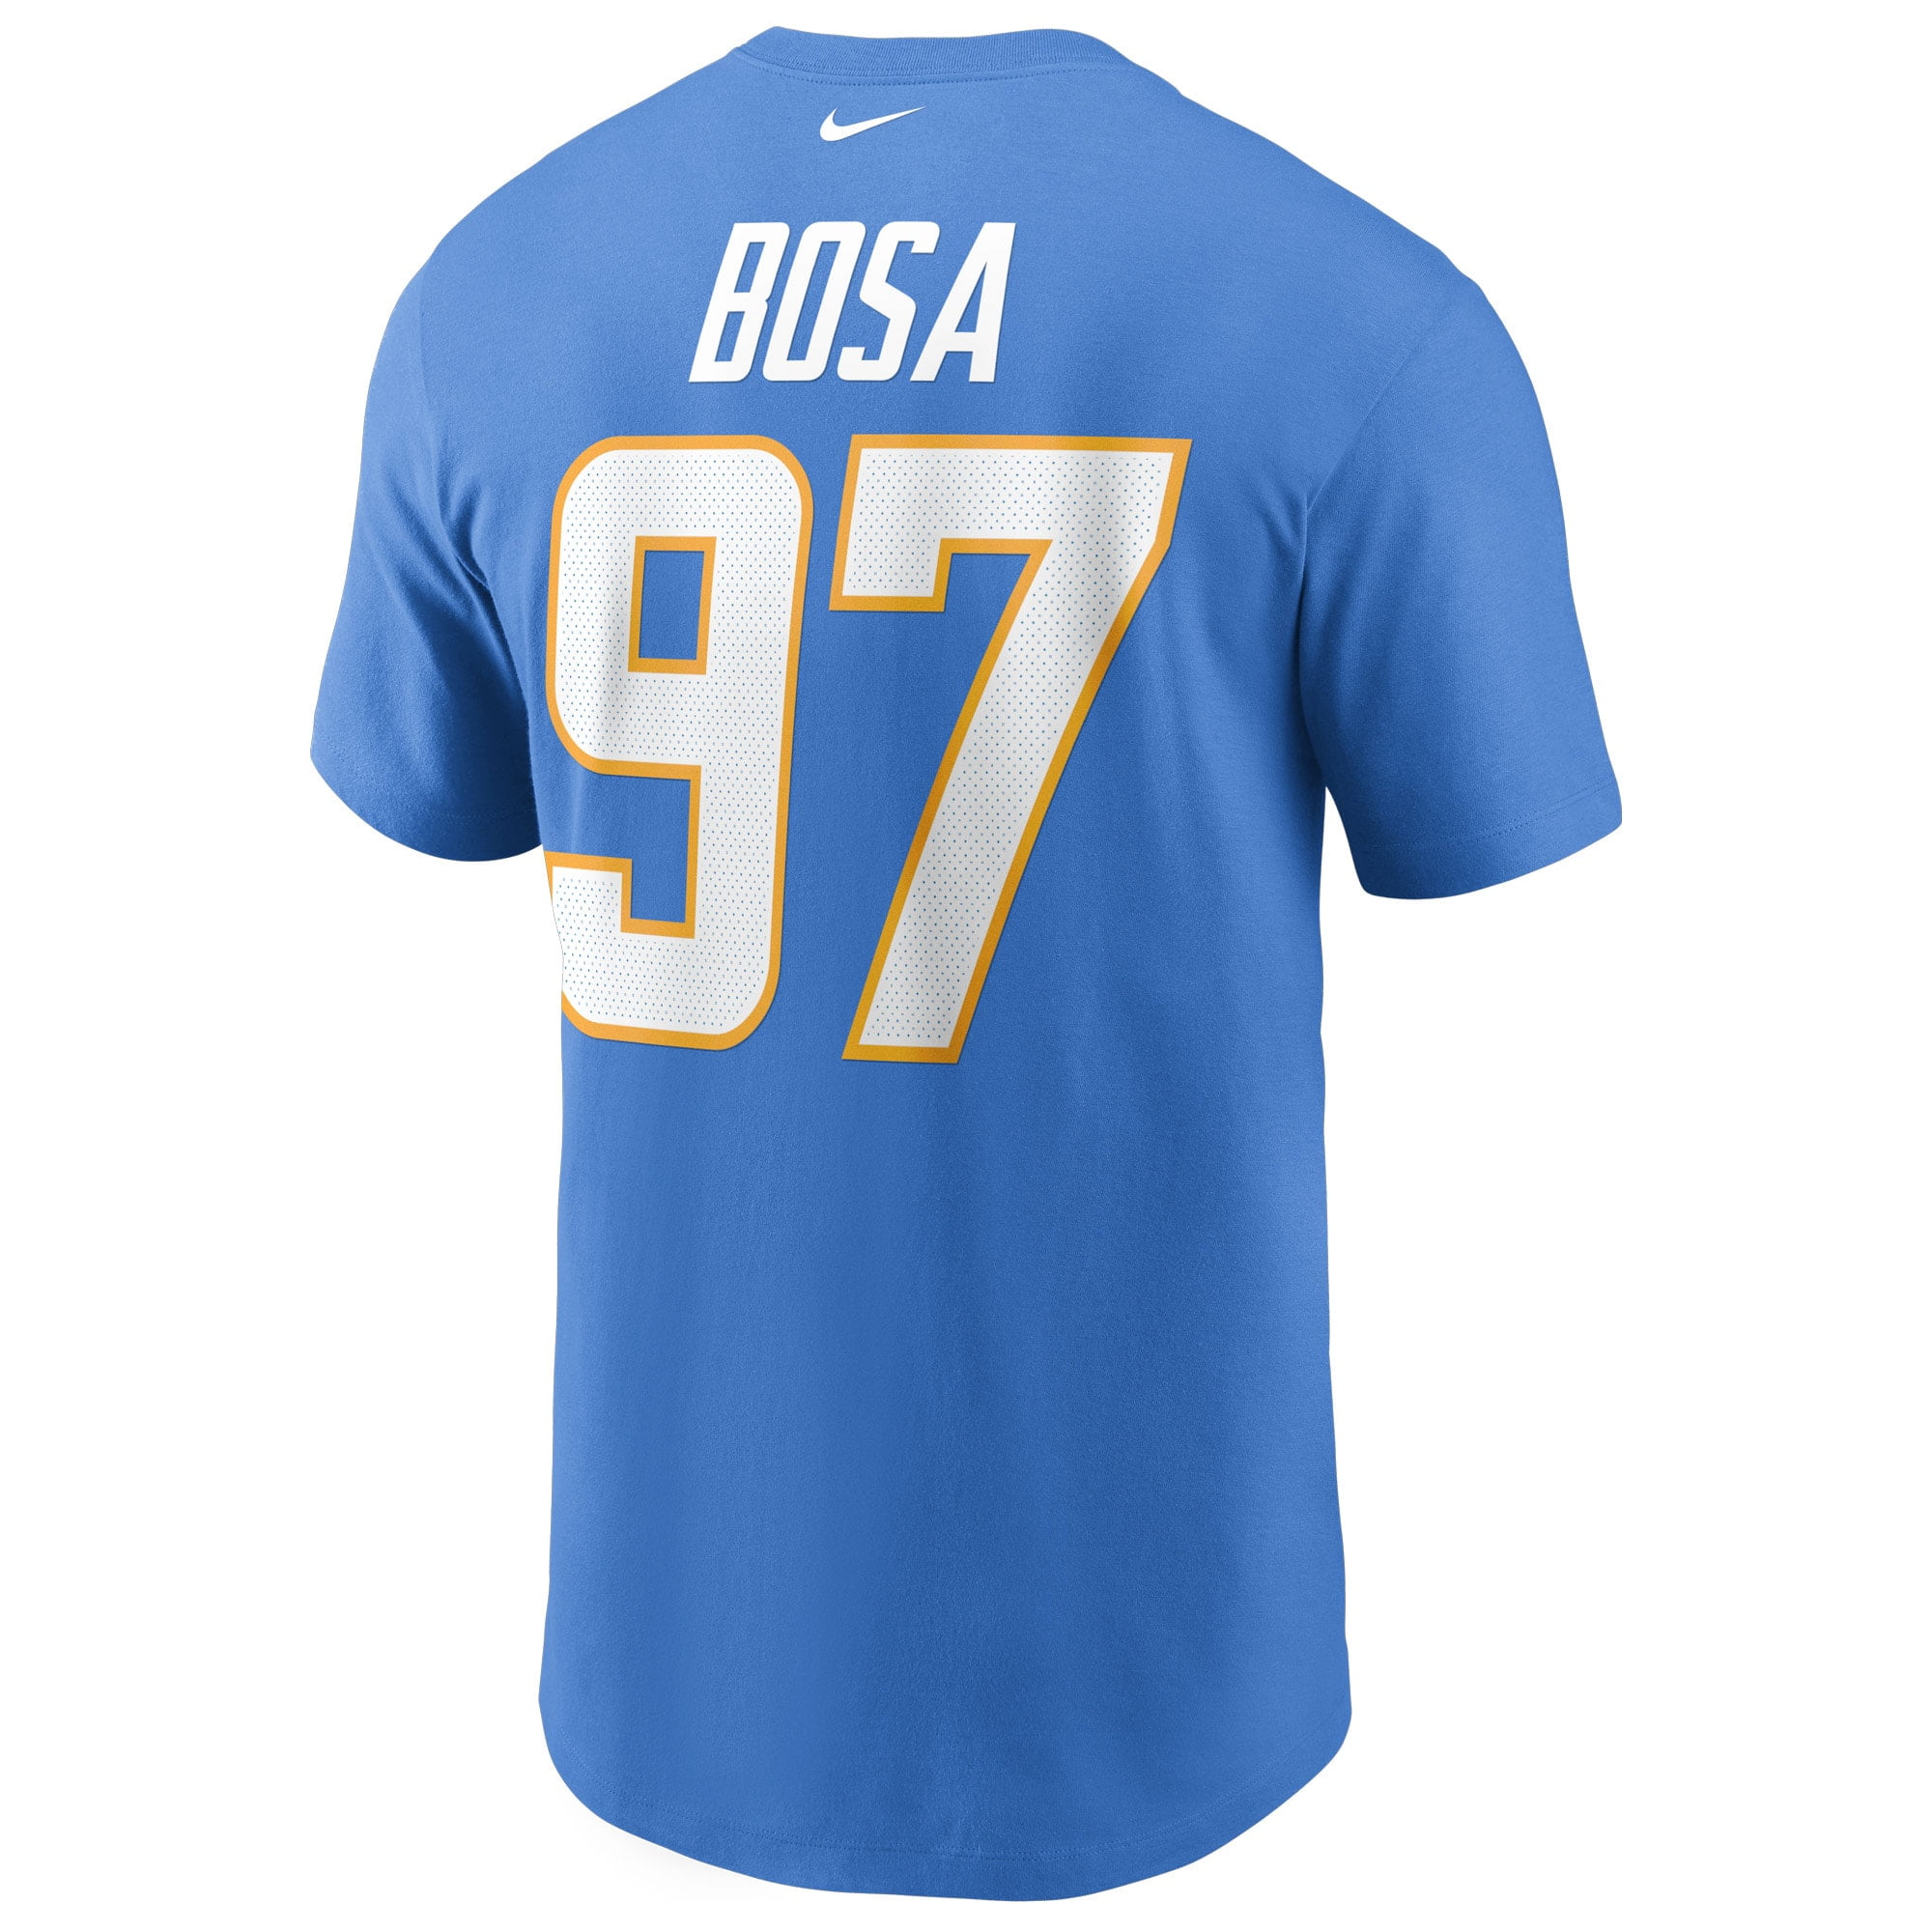 Los Angeles Chargers kids T shirt